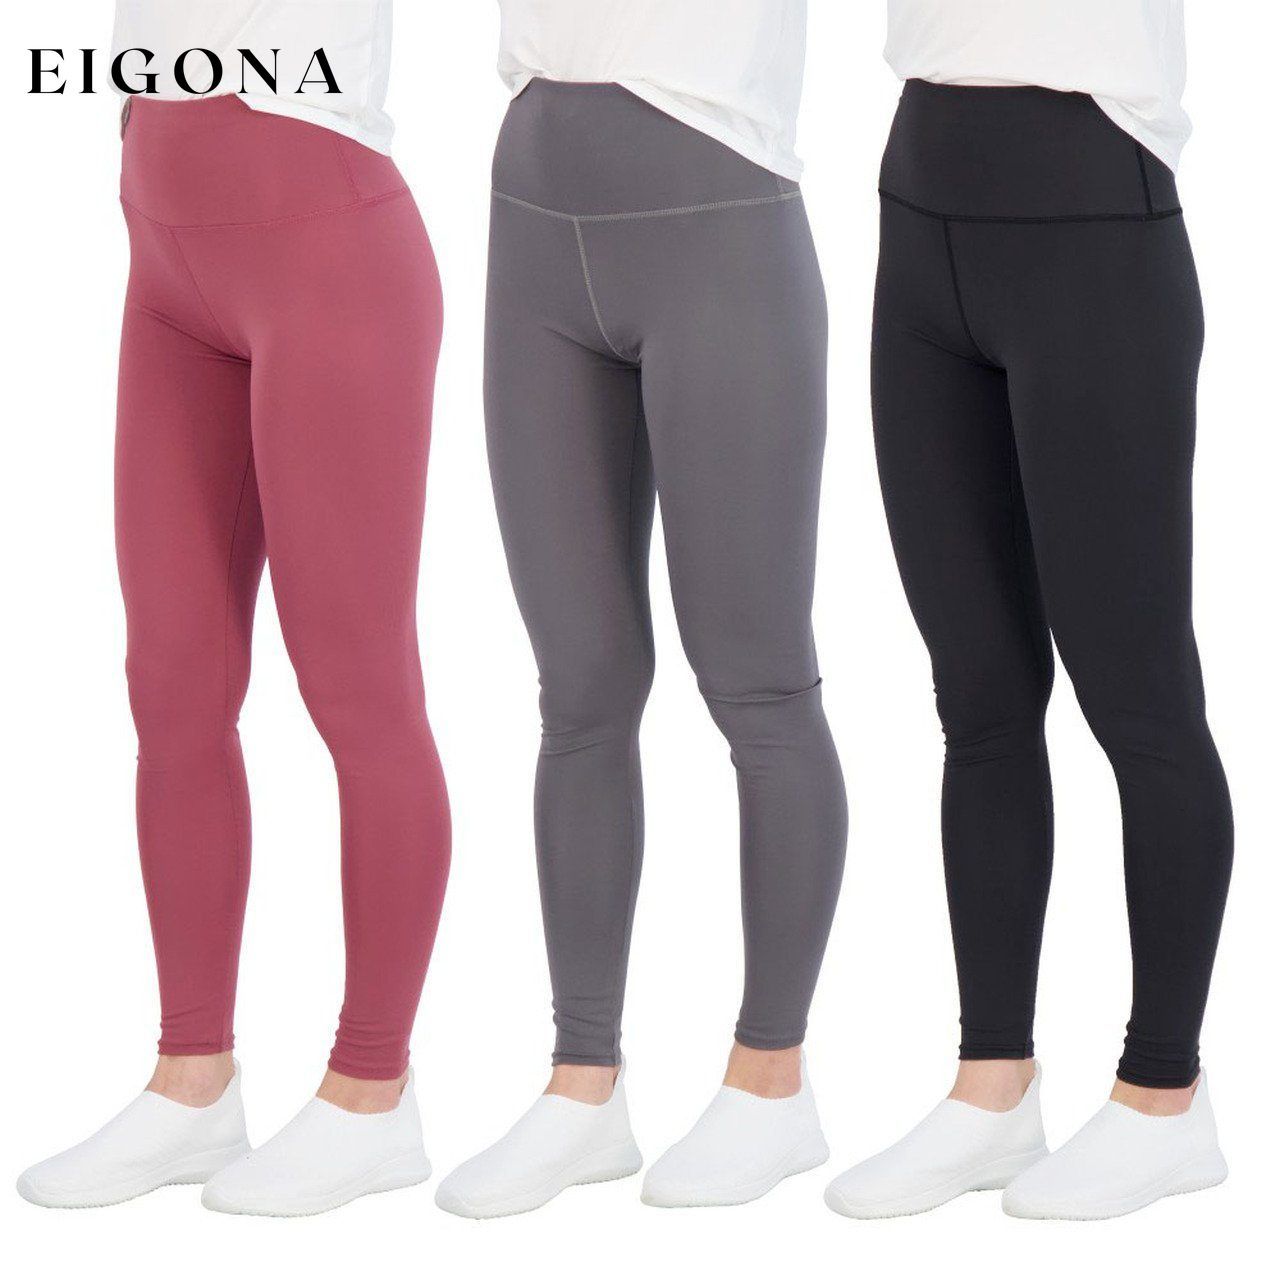 3-Pack: Women's Active Athletic Performance Leggings Red Gray Black __stock:50 bottoms refund_fee:1200